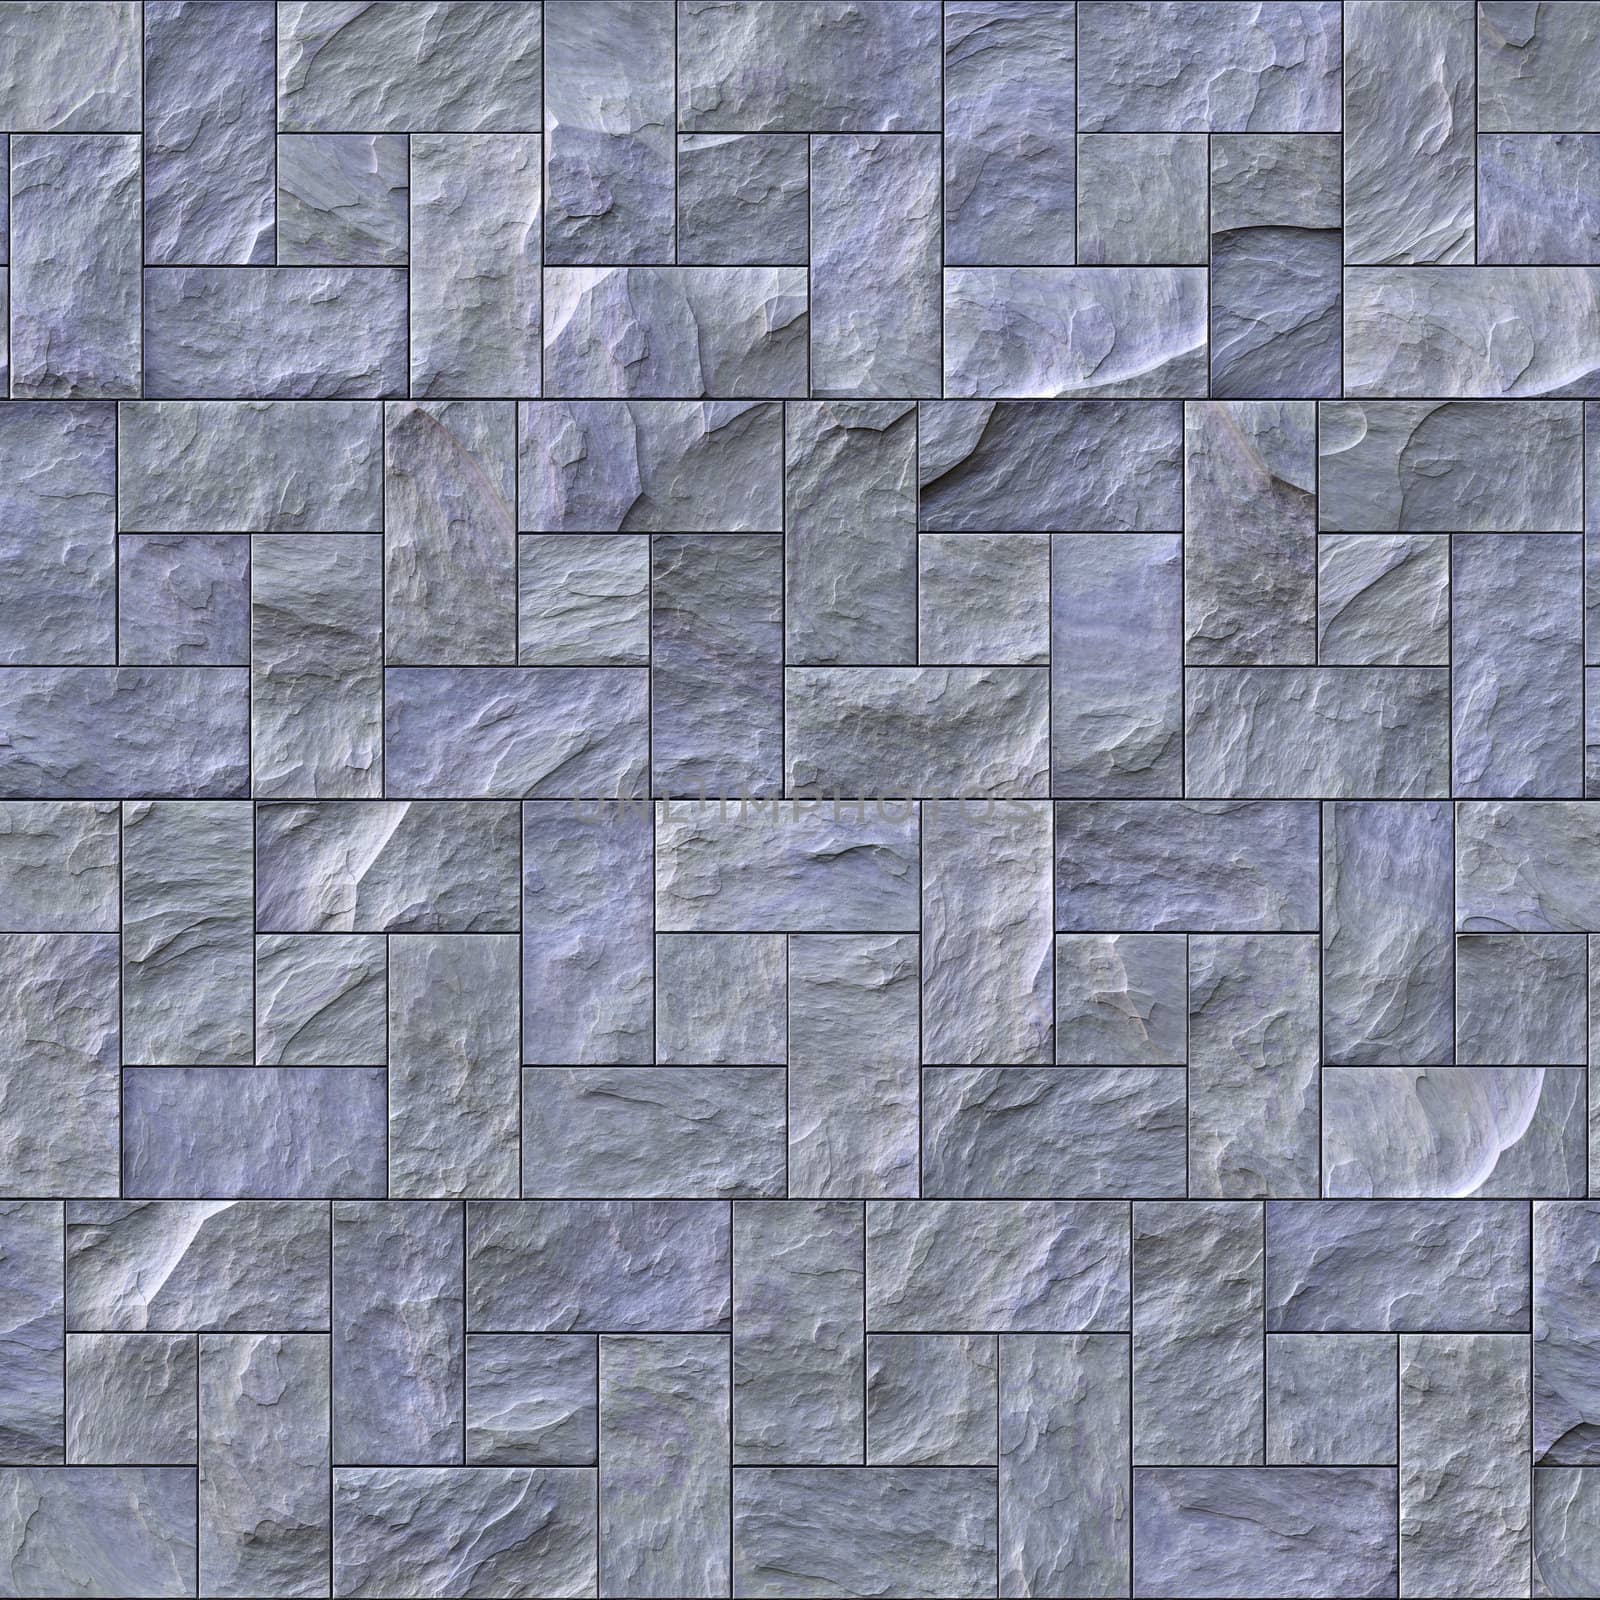 Seamless slate stone wall or path pattern that tiles seamlessly.